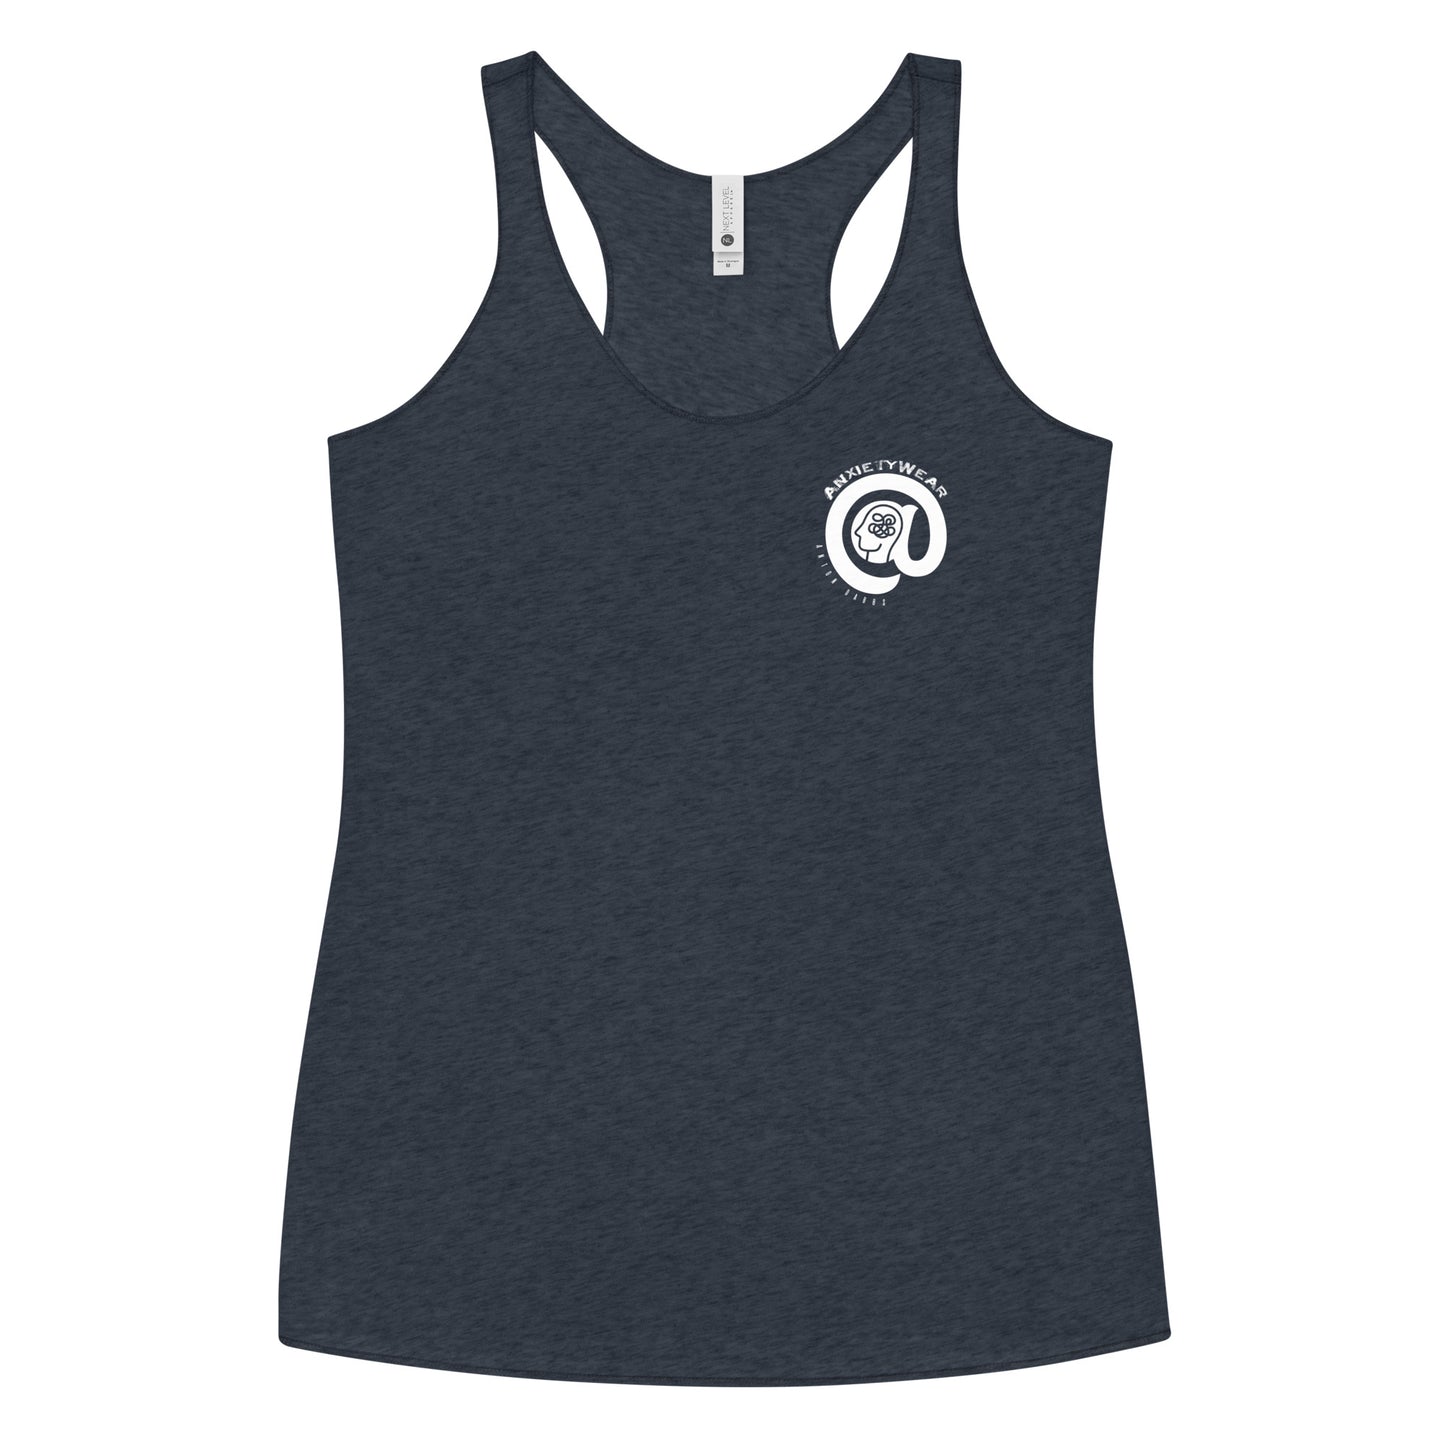 @Anxiety (Branded) - Women's Crested Racerback Tank